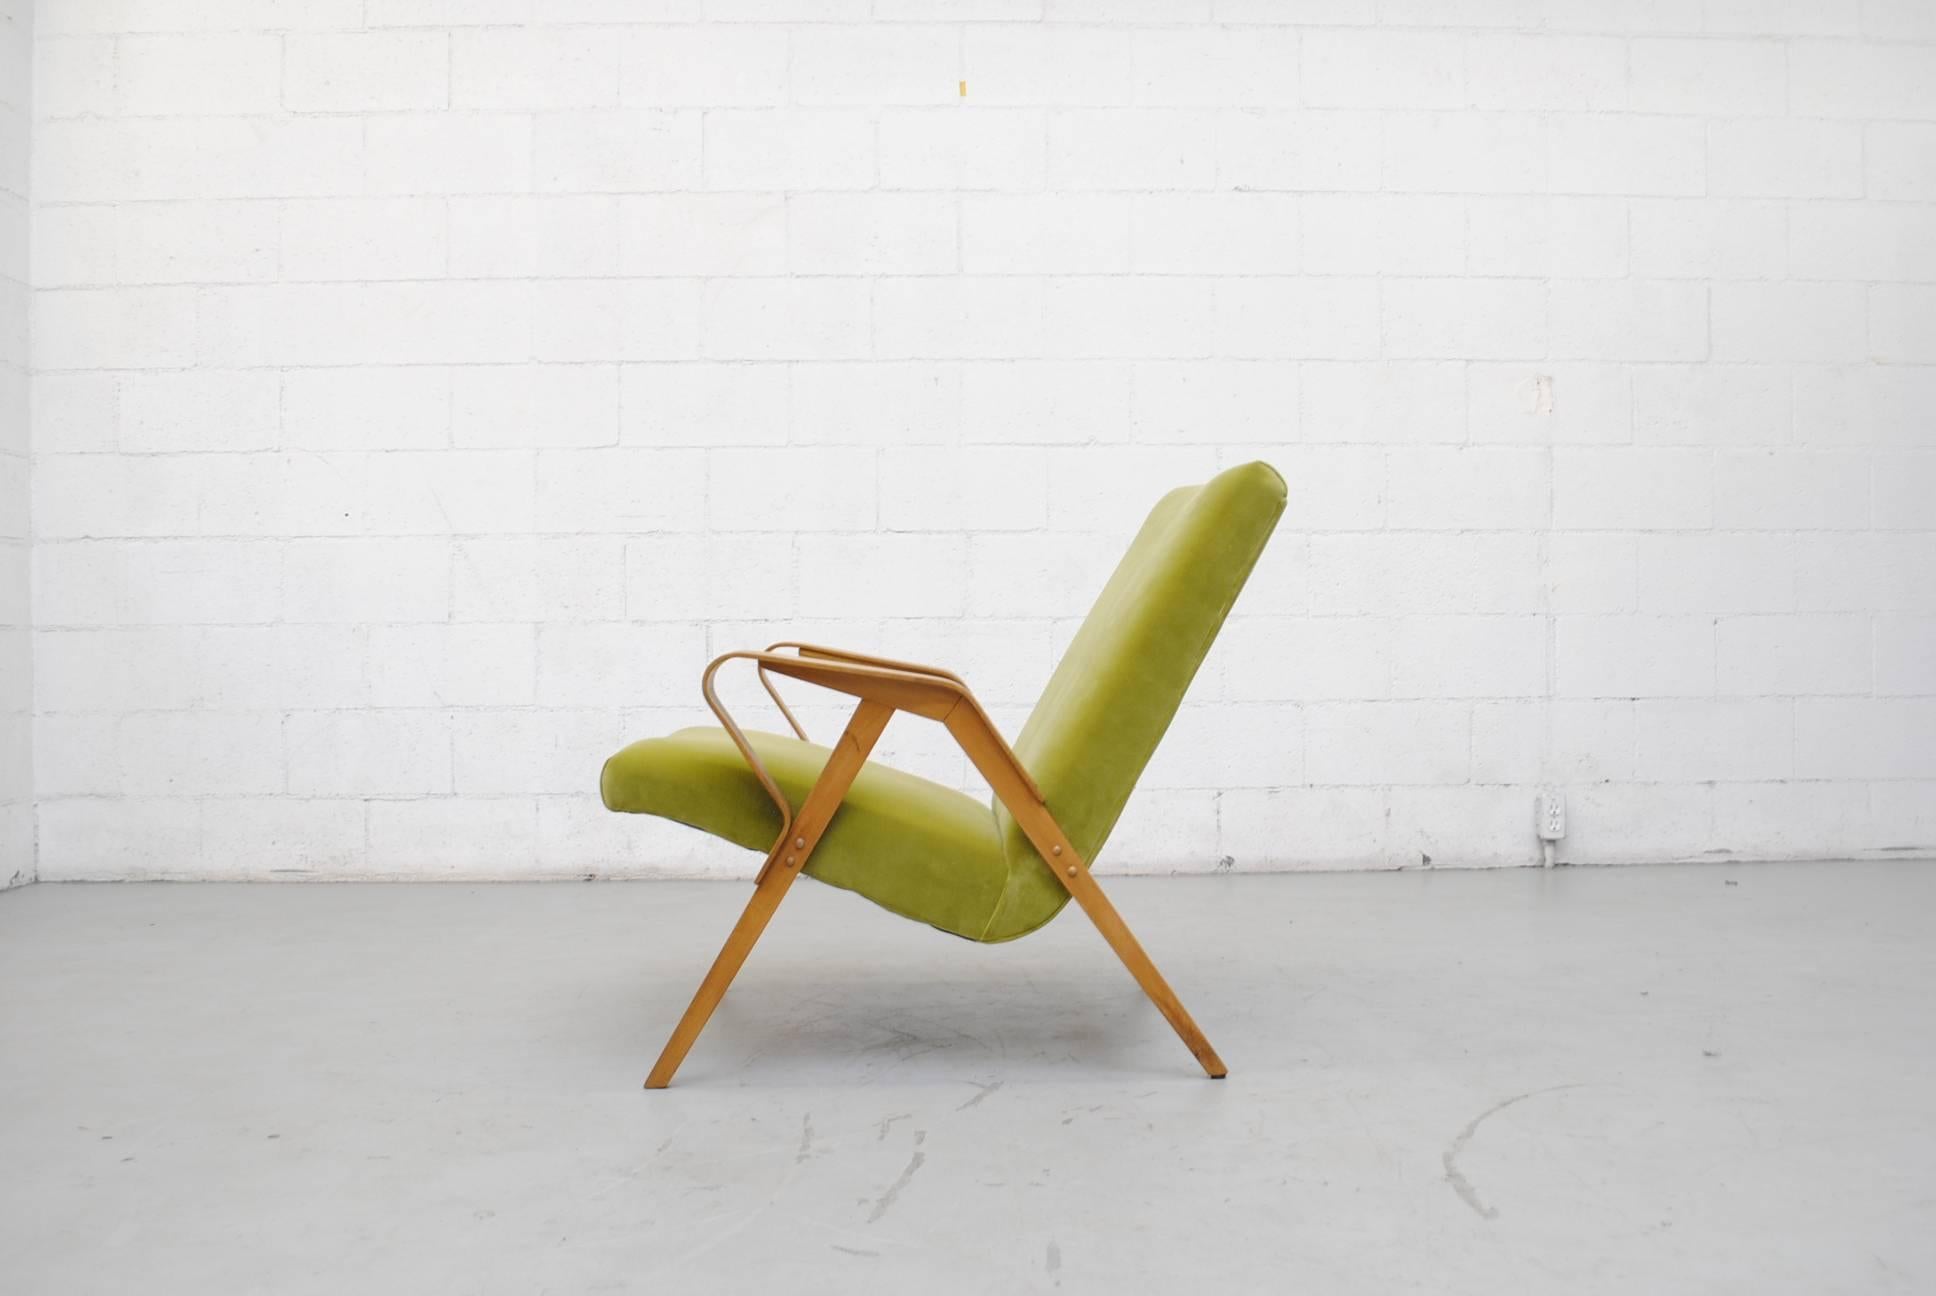 Czech Tatra Bent Plywood Lounge Chair in Lime Velvet